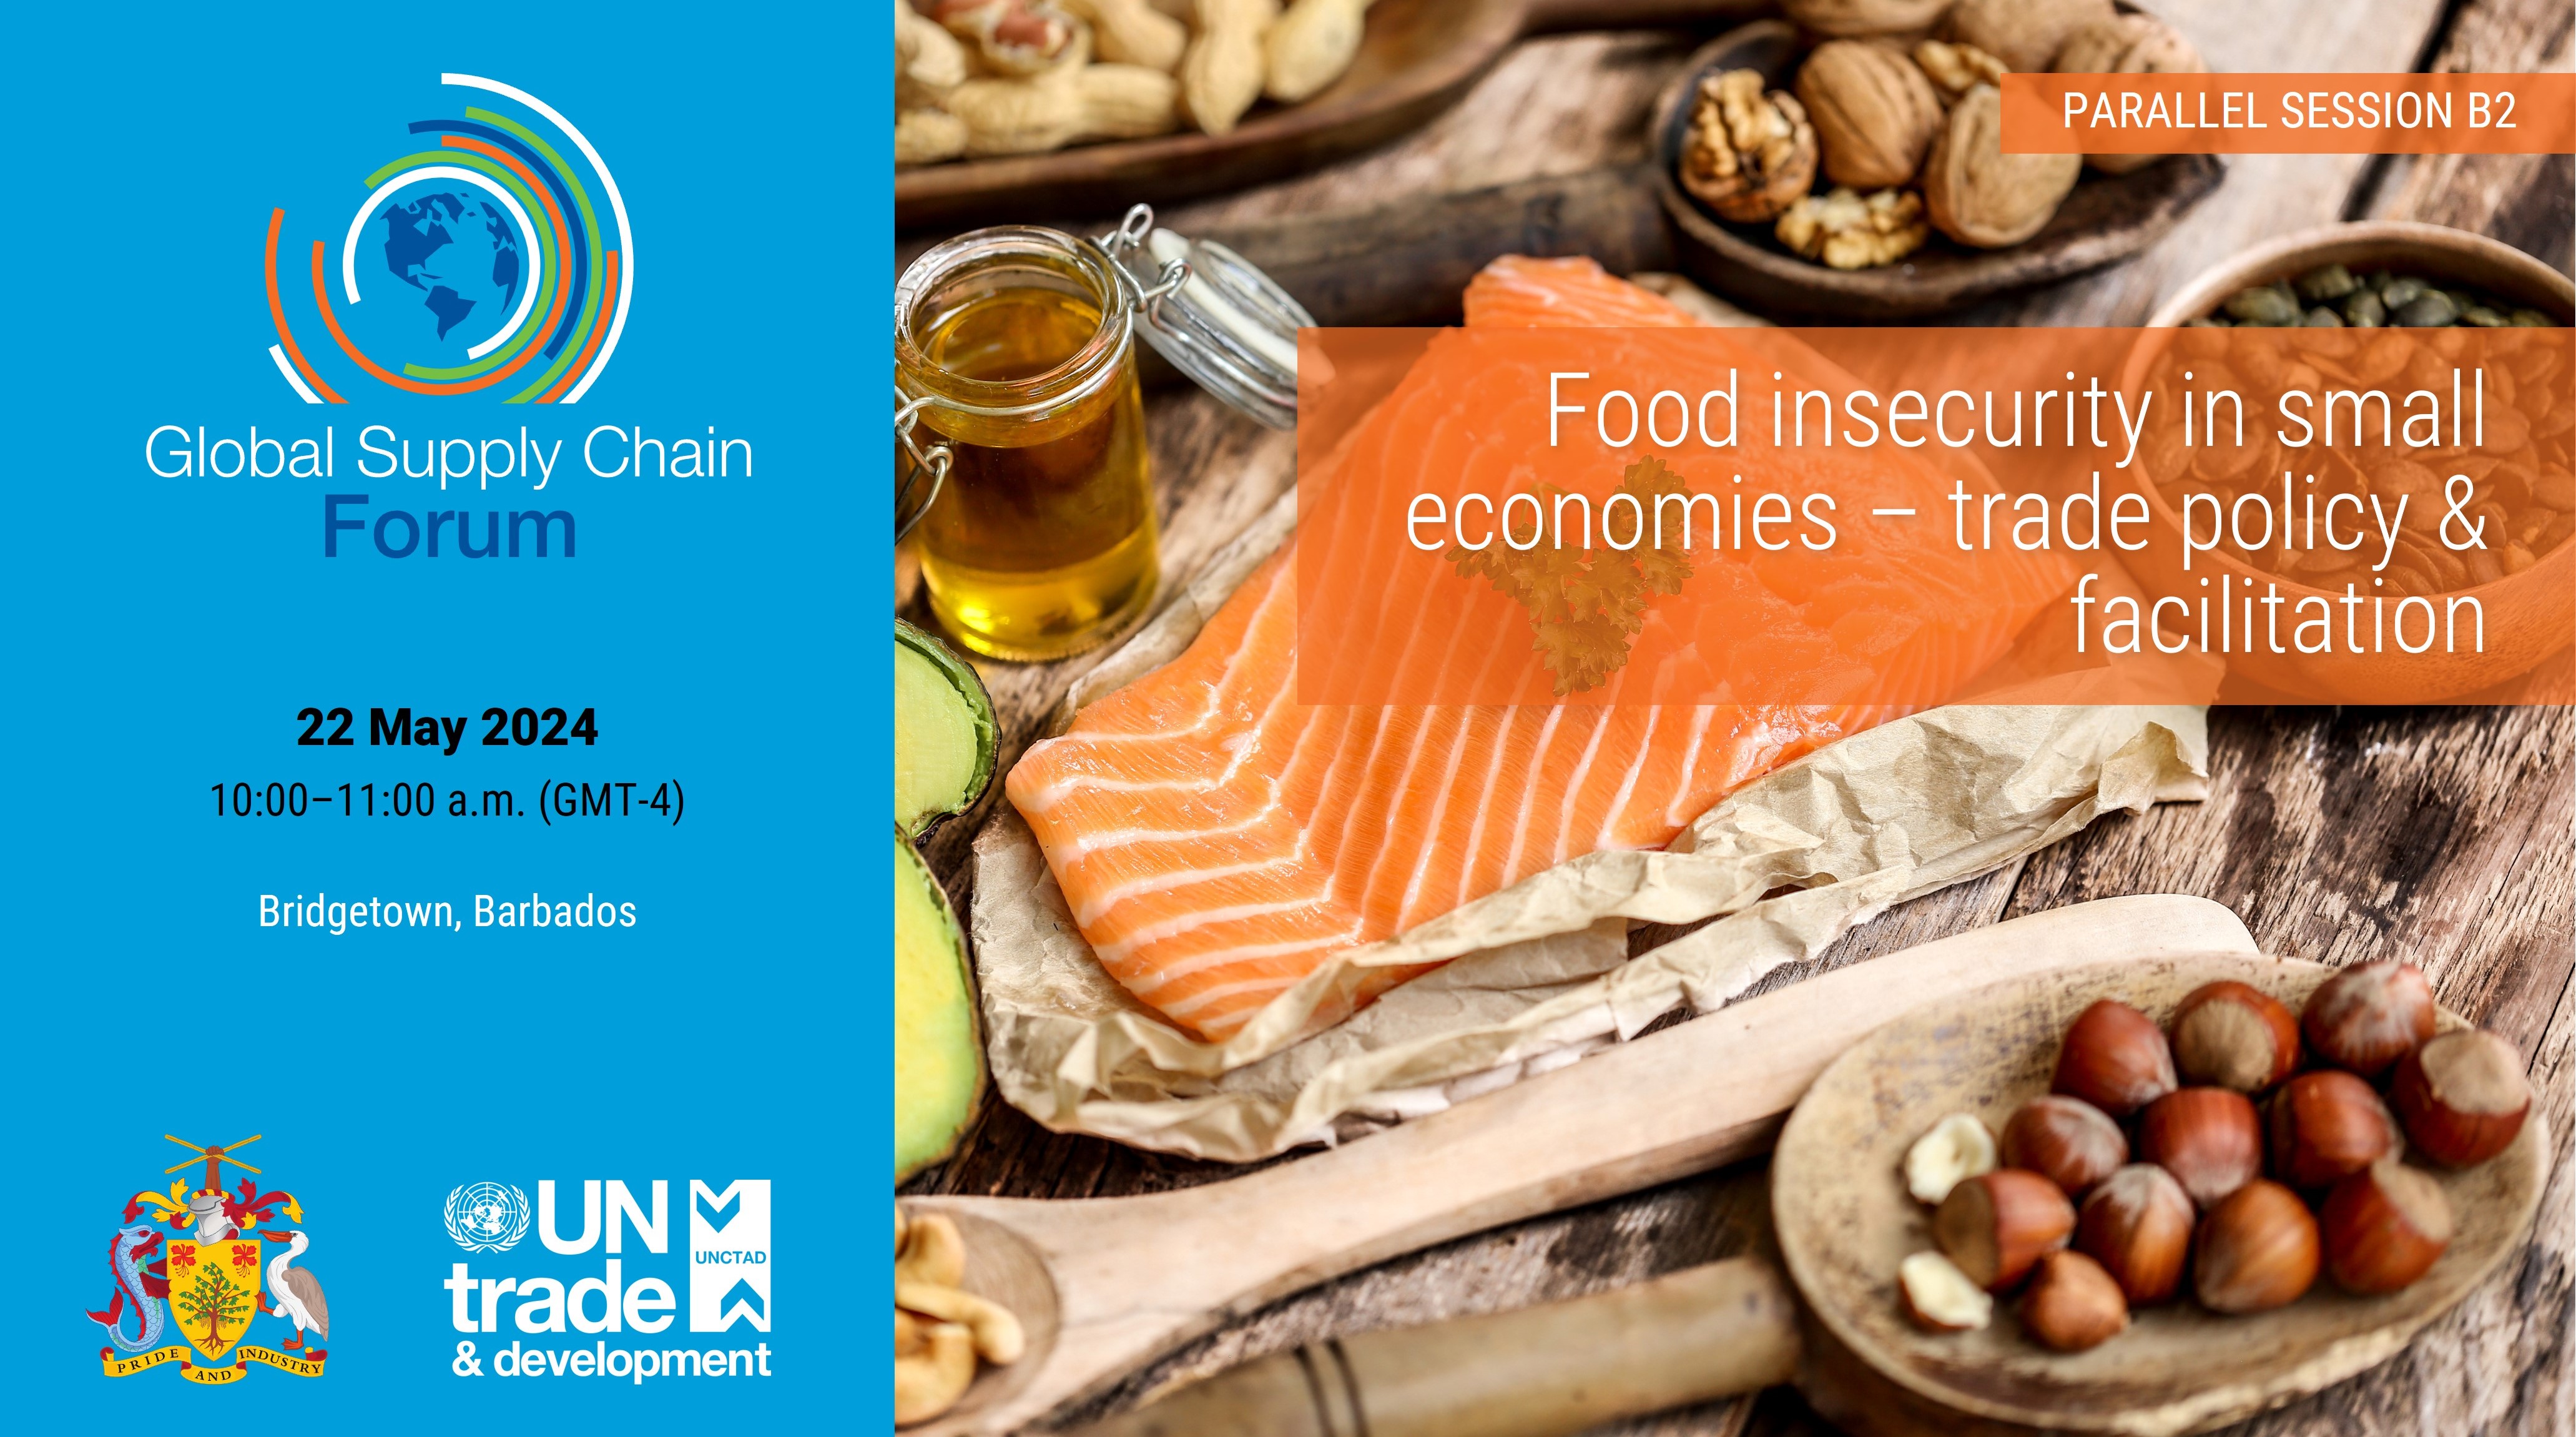 Food insecurity in small economies - Focus on trade policy and facilitation